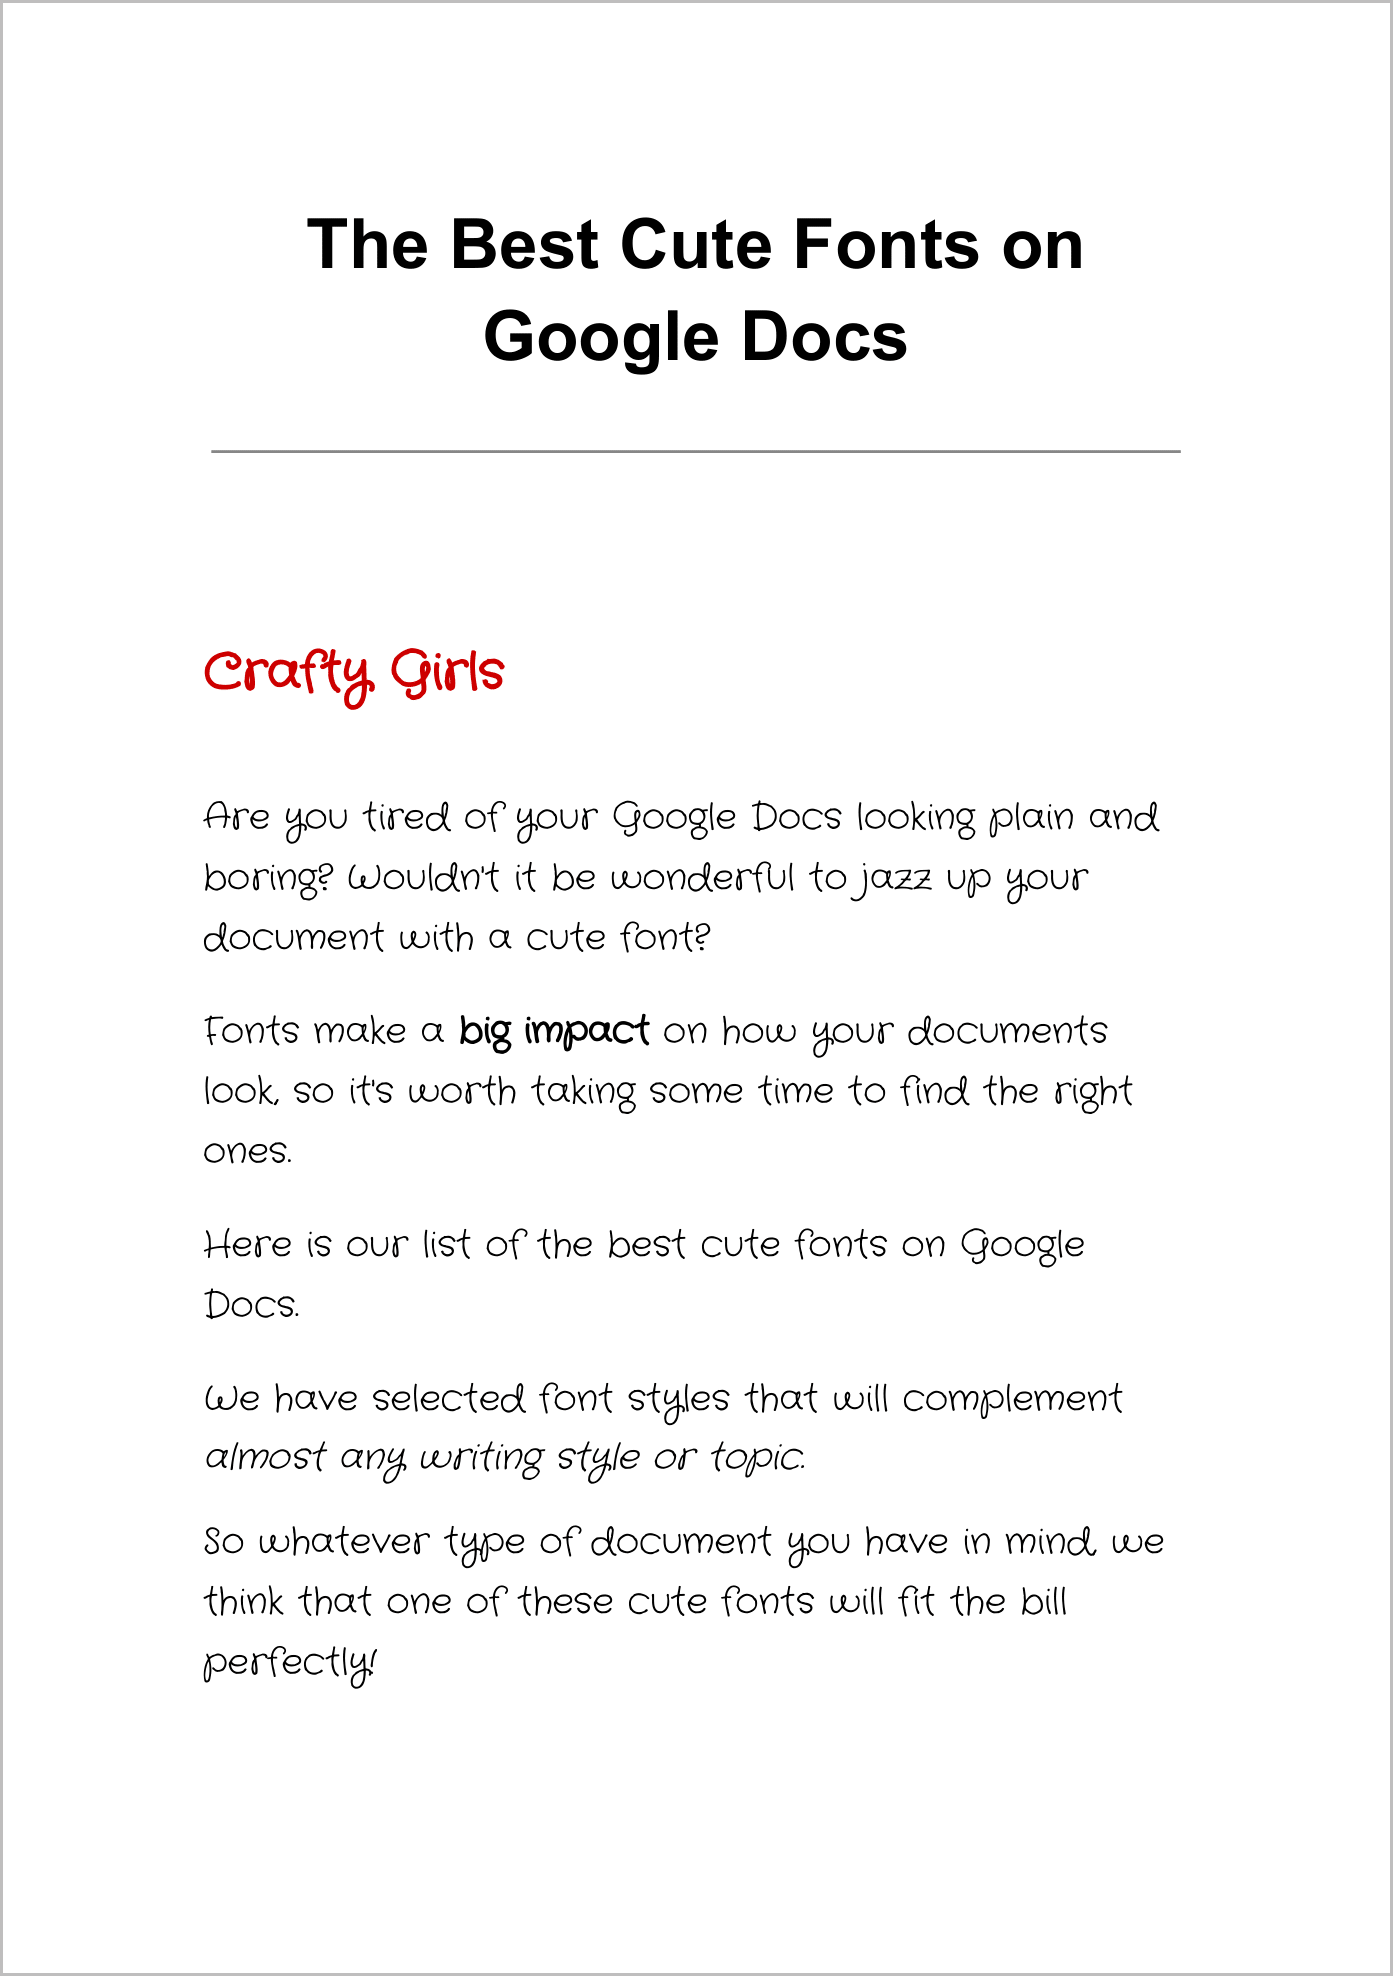 What is a cute font on docs?